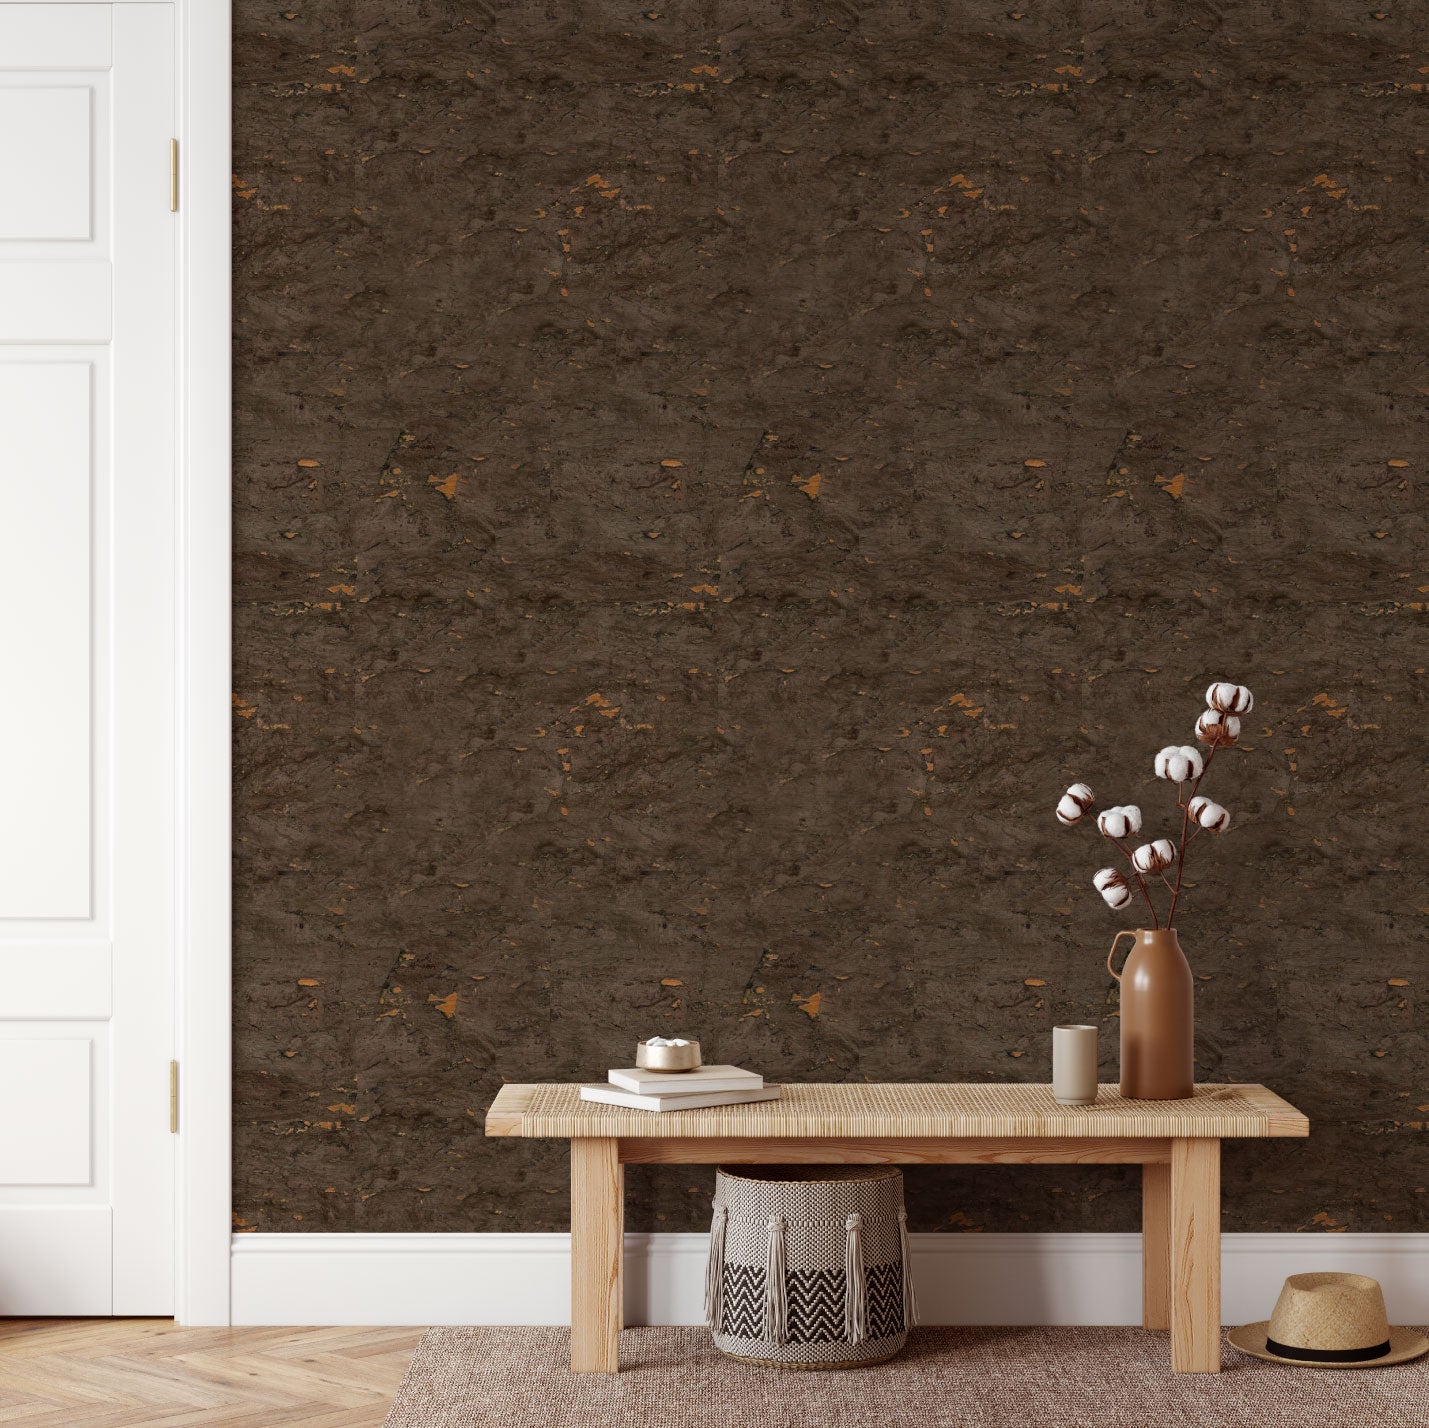 wallpaper Natural Textured Eco-Friendly Non-toxic High-quality  Sustainable Interior Design Bold Custom Tailor-made Retro chic cork anti-microbial moisture resistant nature wood grain lux metallic shiny cabin brown neutral bronze